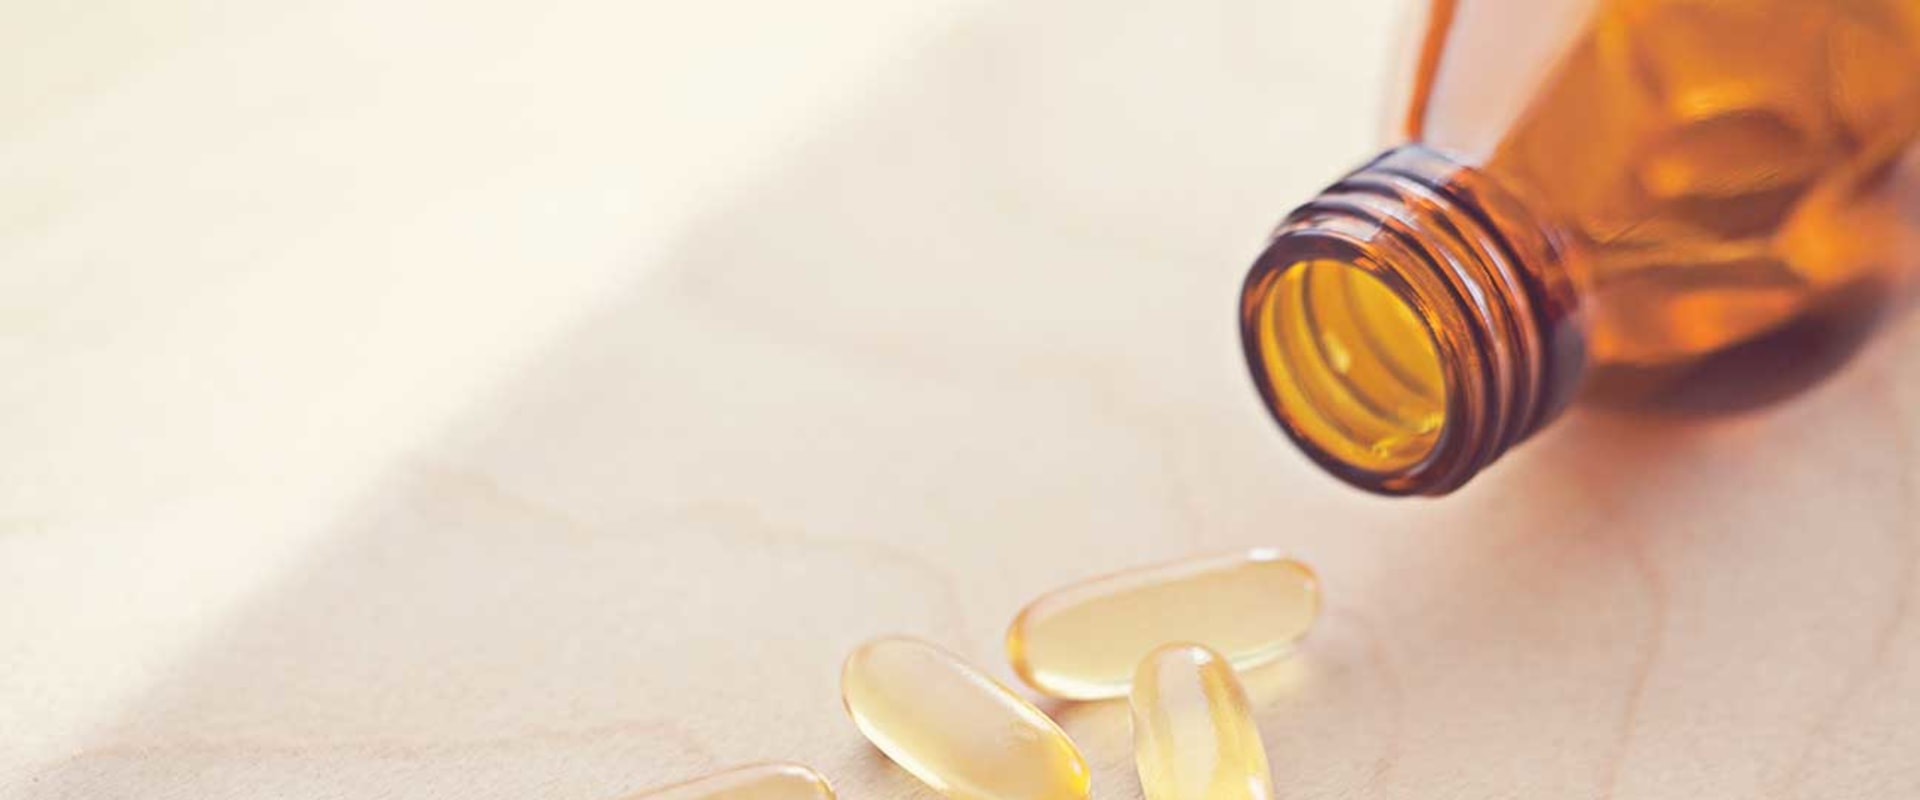 What is the safest amount of vitamin d to take?